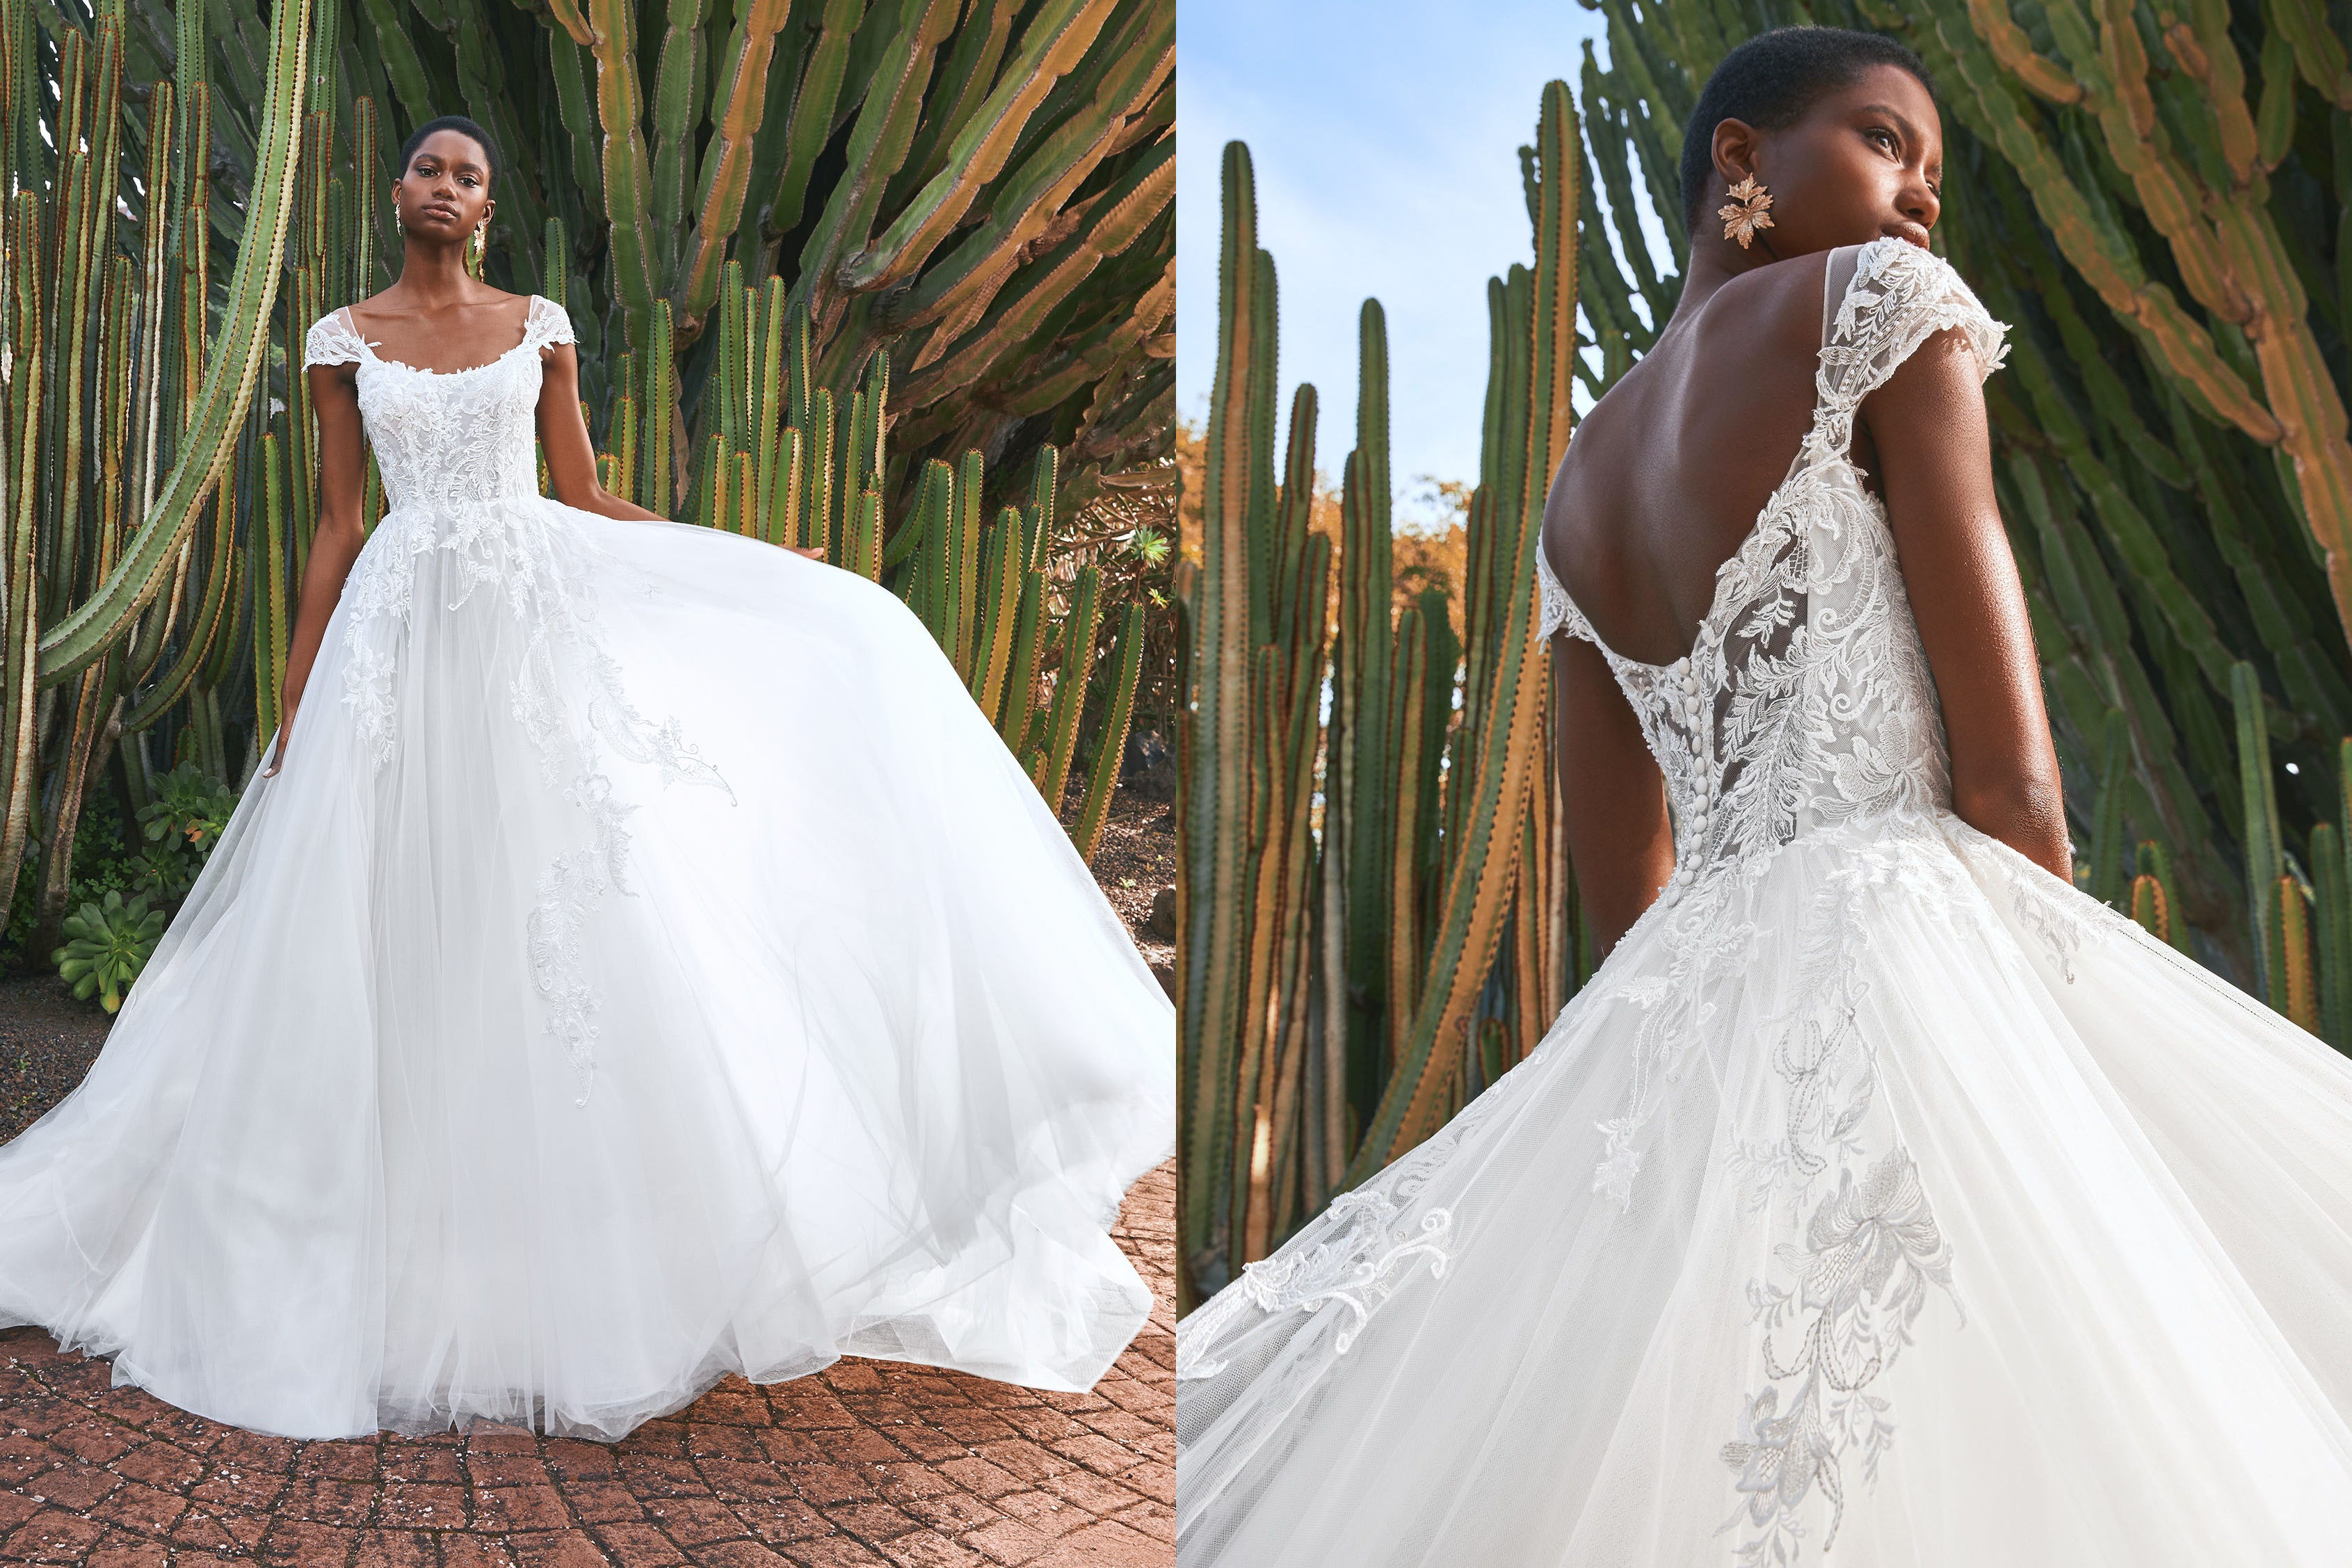 Bromo A Line Cap Sleeve Lace Tulle Applique Wedding Dress by Pronovias Barcelona Bridal at Fashionably Yours Sydney